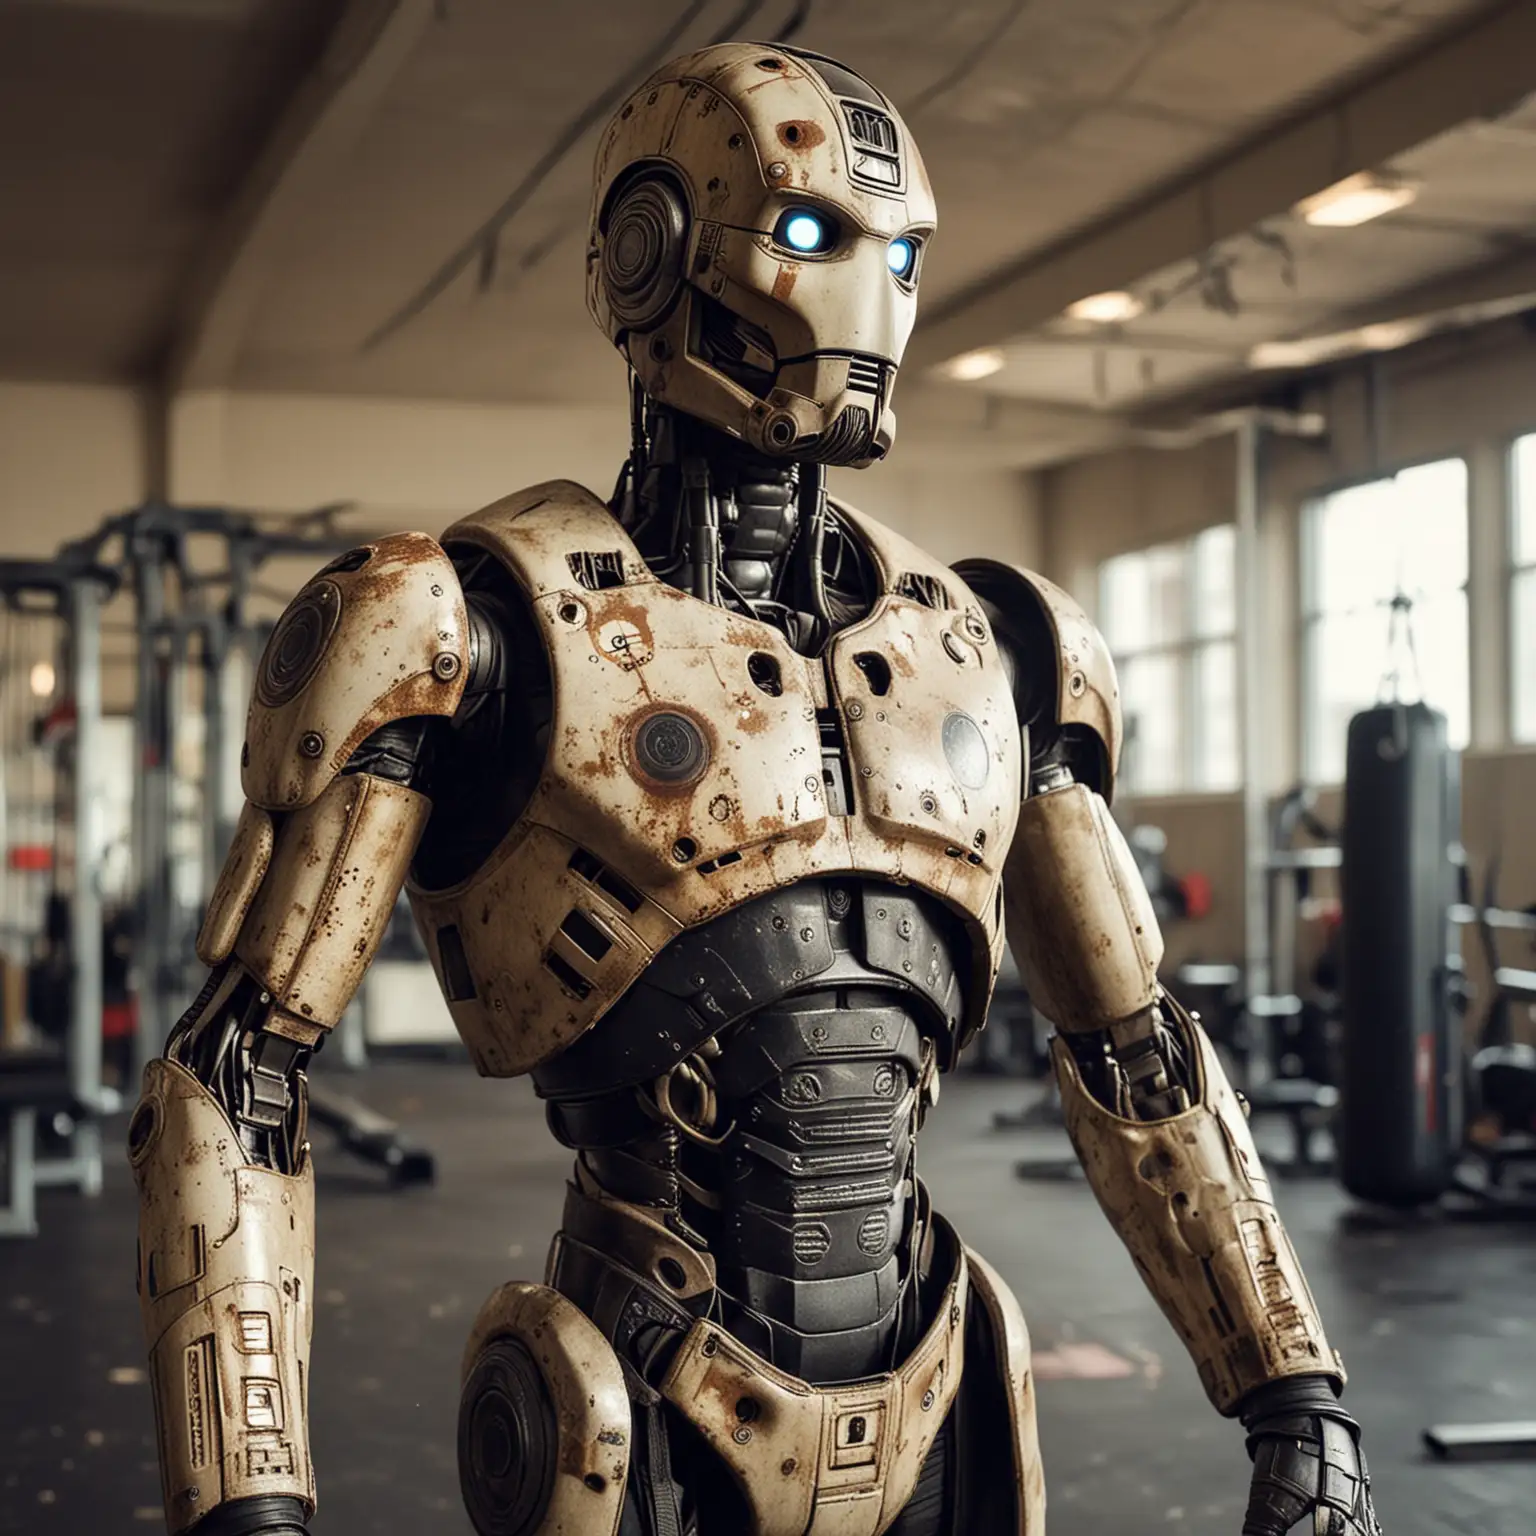 A fitness instructor droid in the gym, scuffed and worn after his boxing career ended